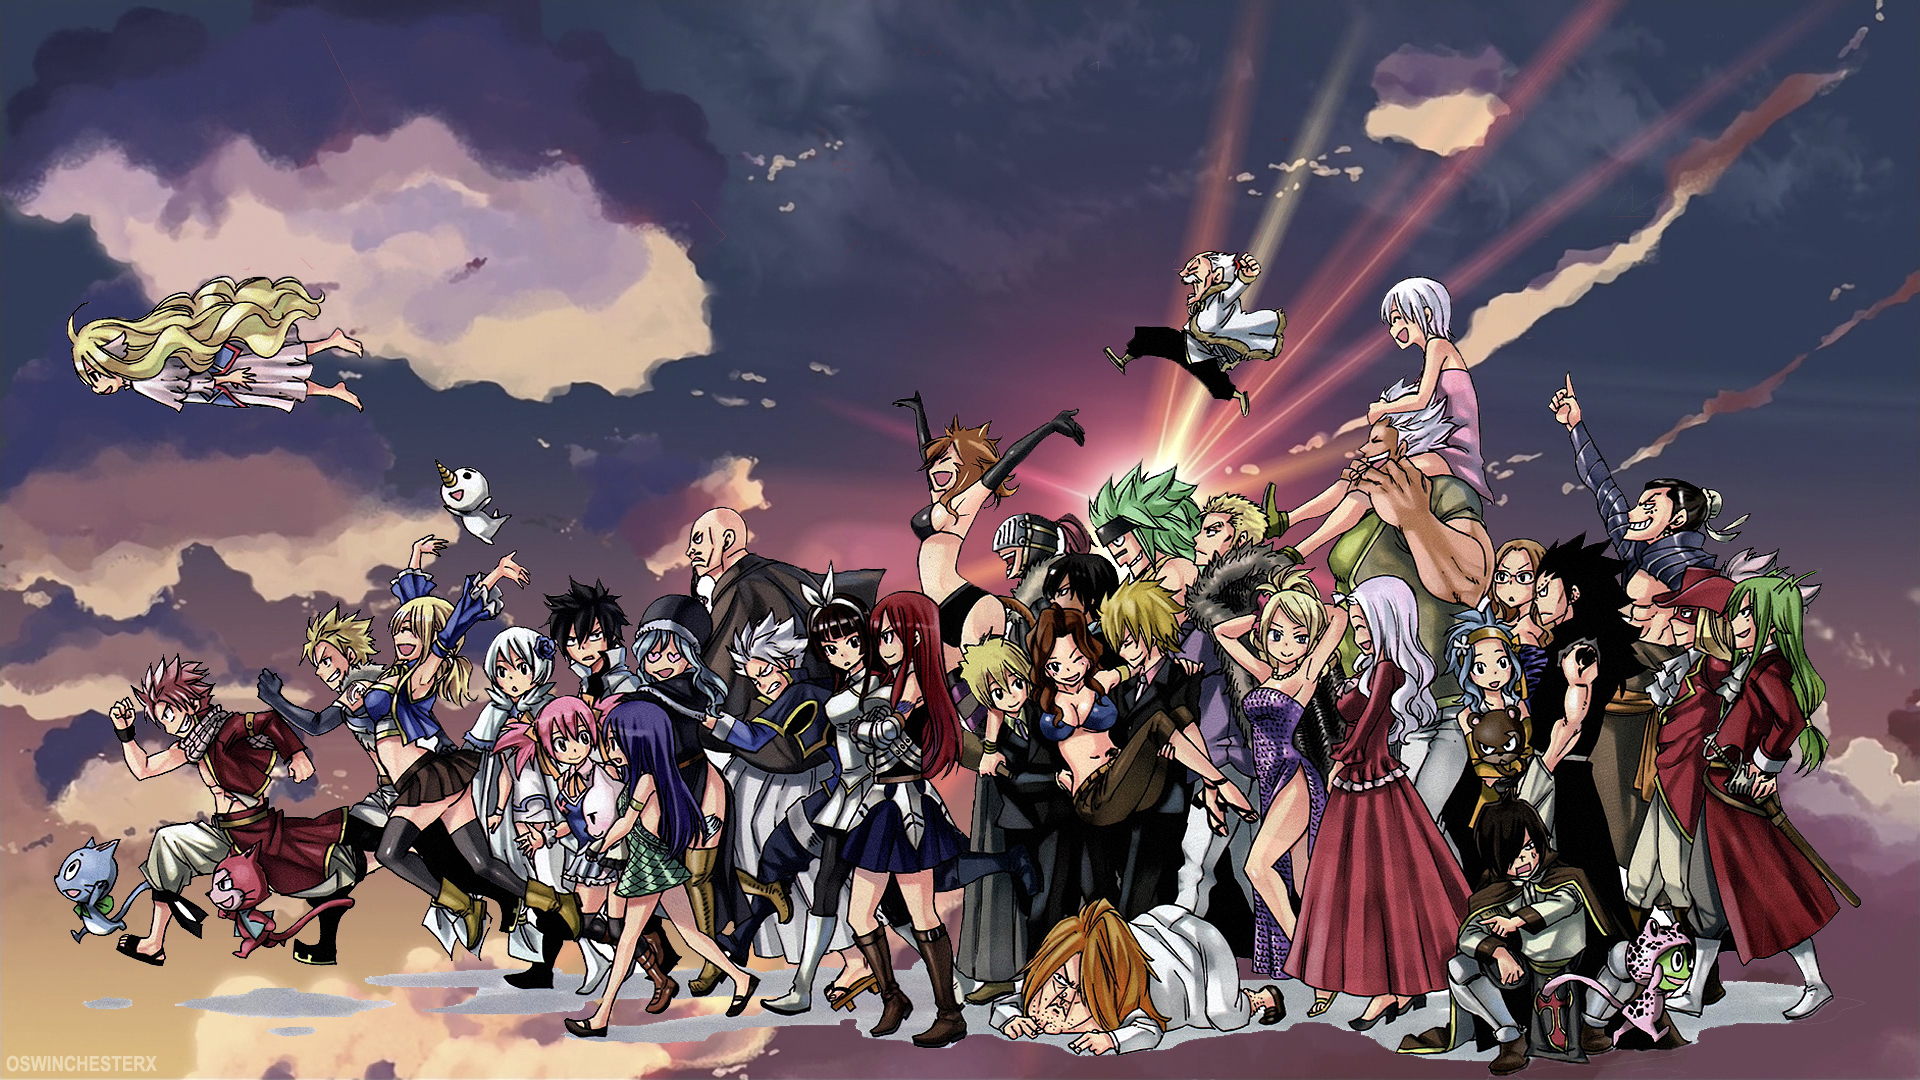 Anime Fairy Tail HD Wallpaper by oswinchesterx